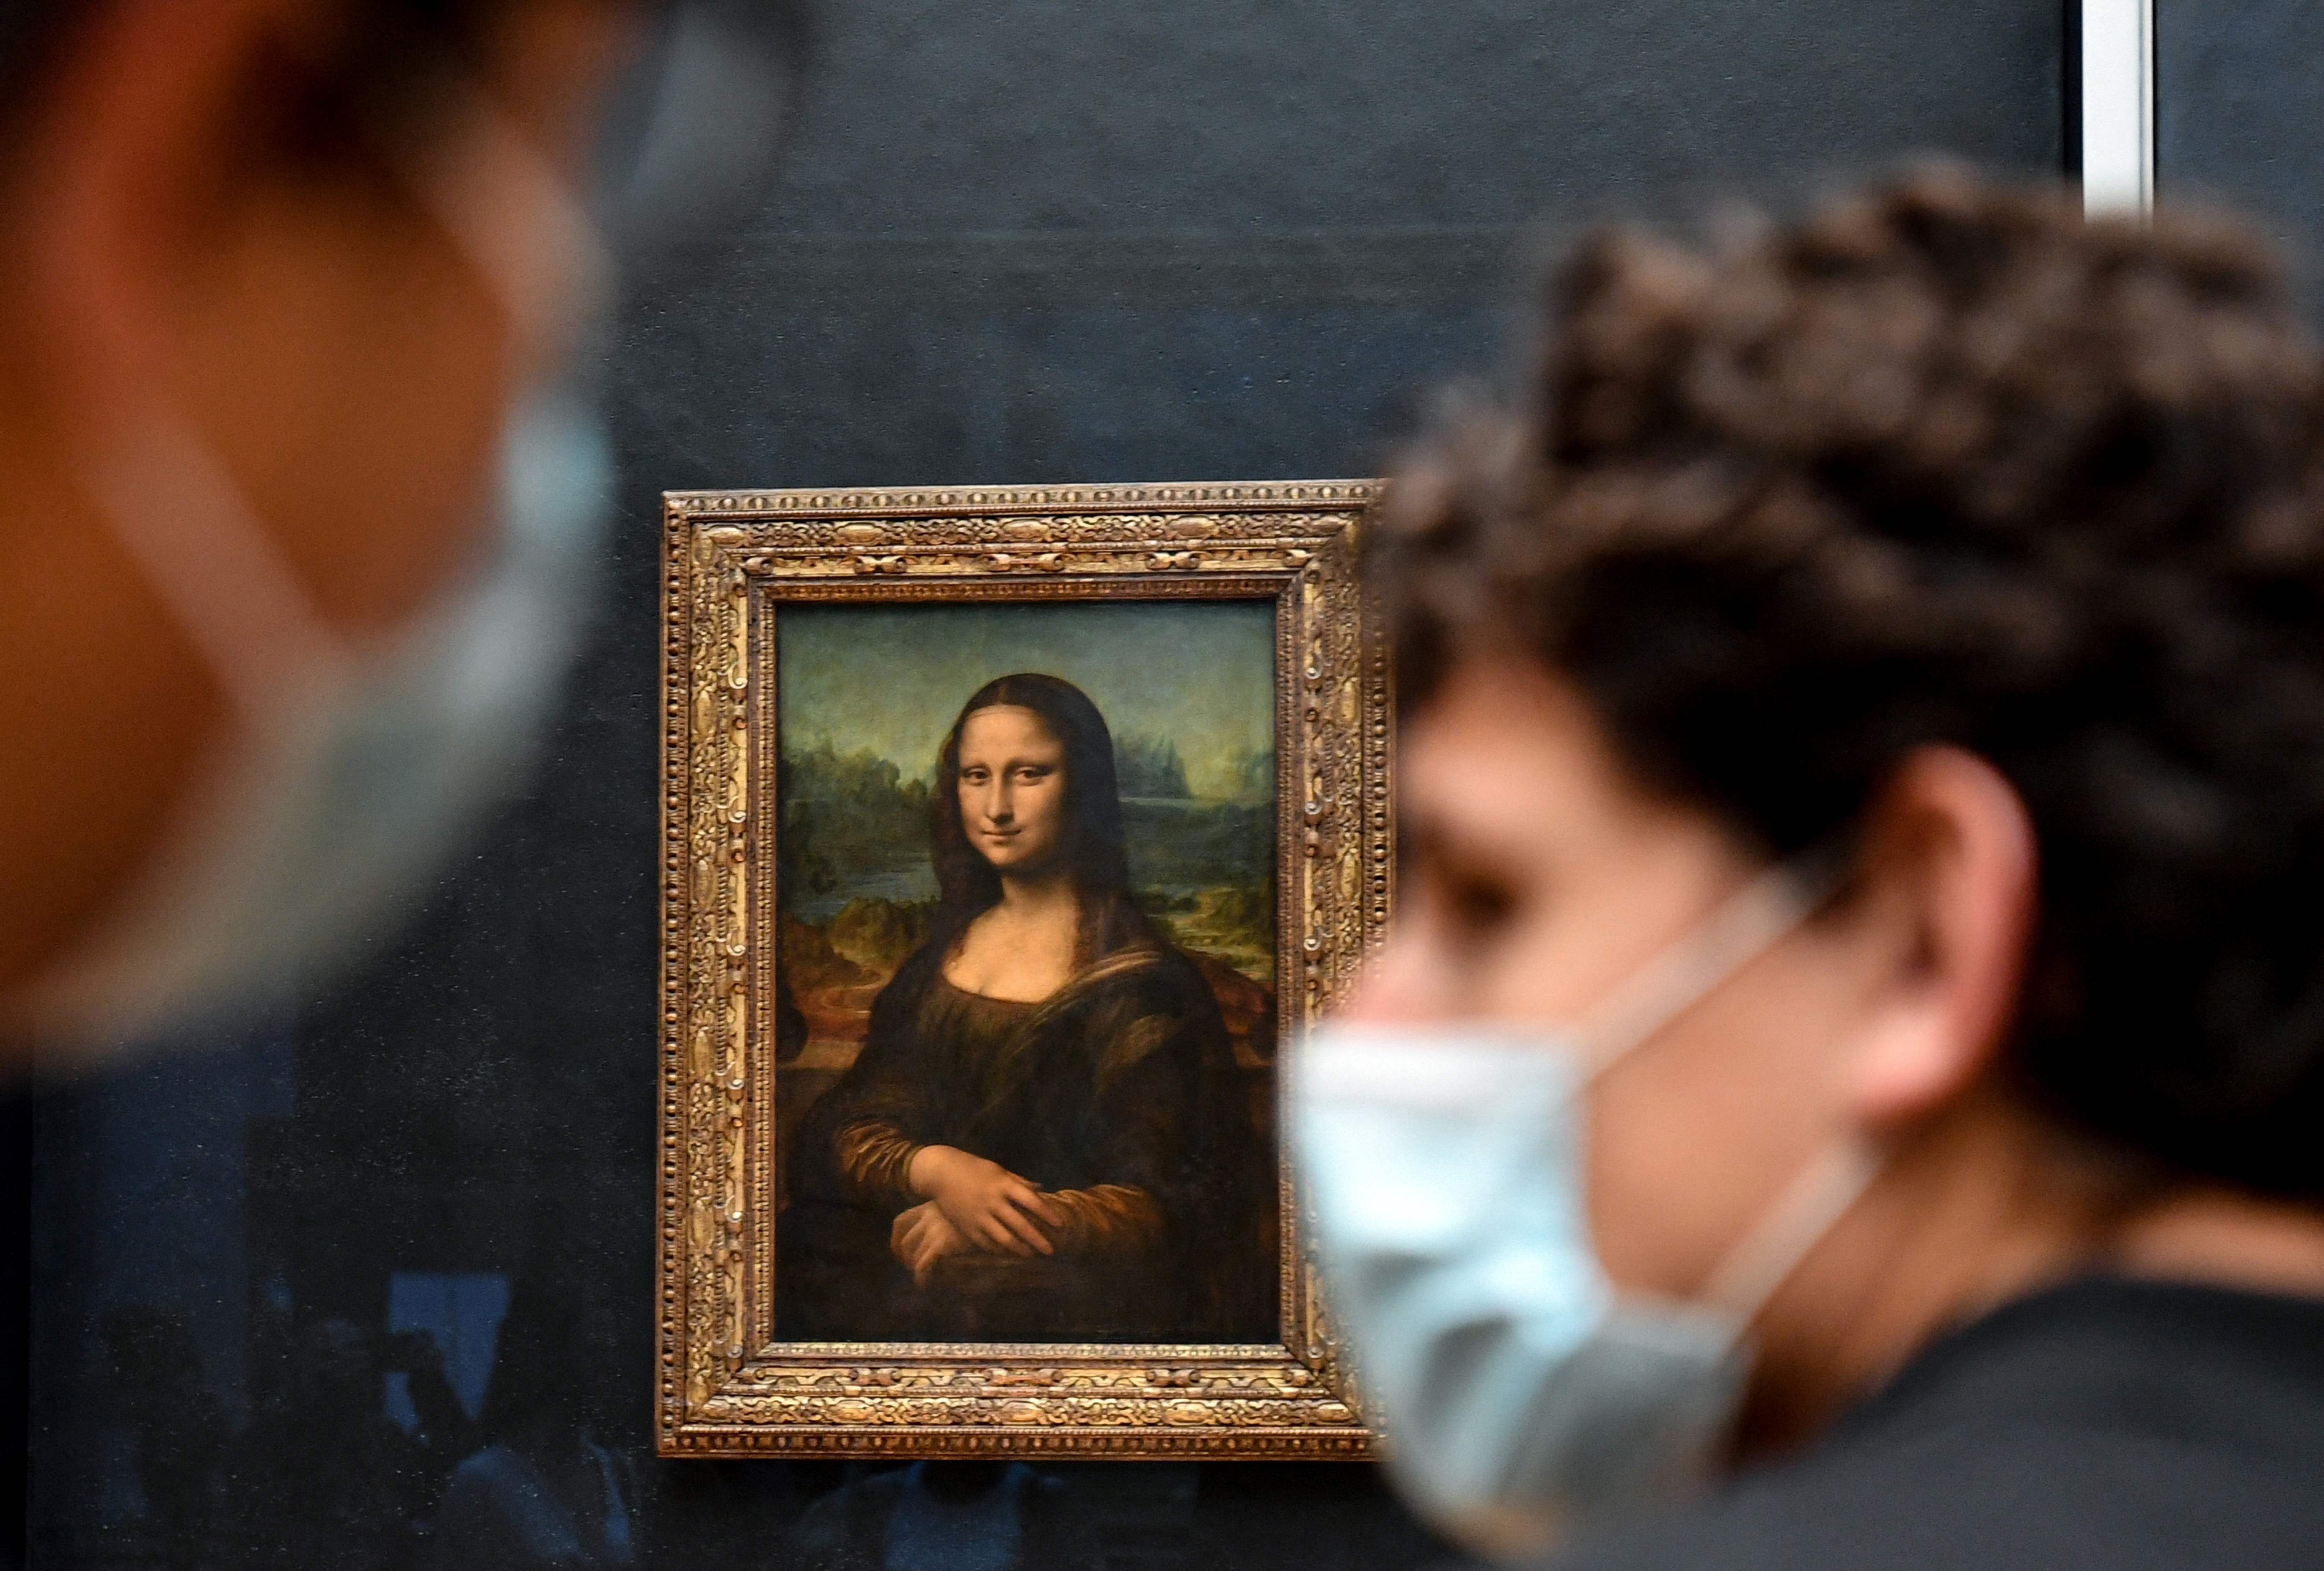 In this photo taken on May 19, 2021 visitors walk past the painting "La Joconde" The Mona Lisa by Italian artist Leonardo Da Vinci on display in the "Salle des Etats" at The Louvre Museum in Paris